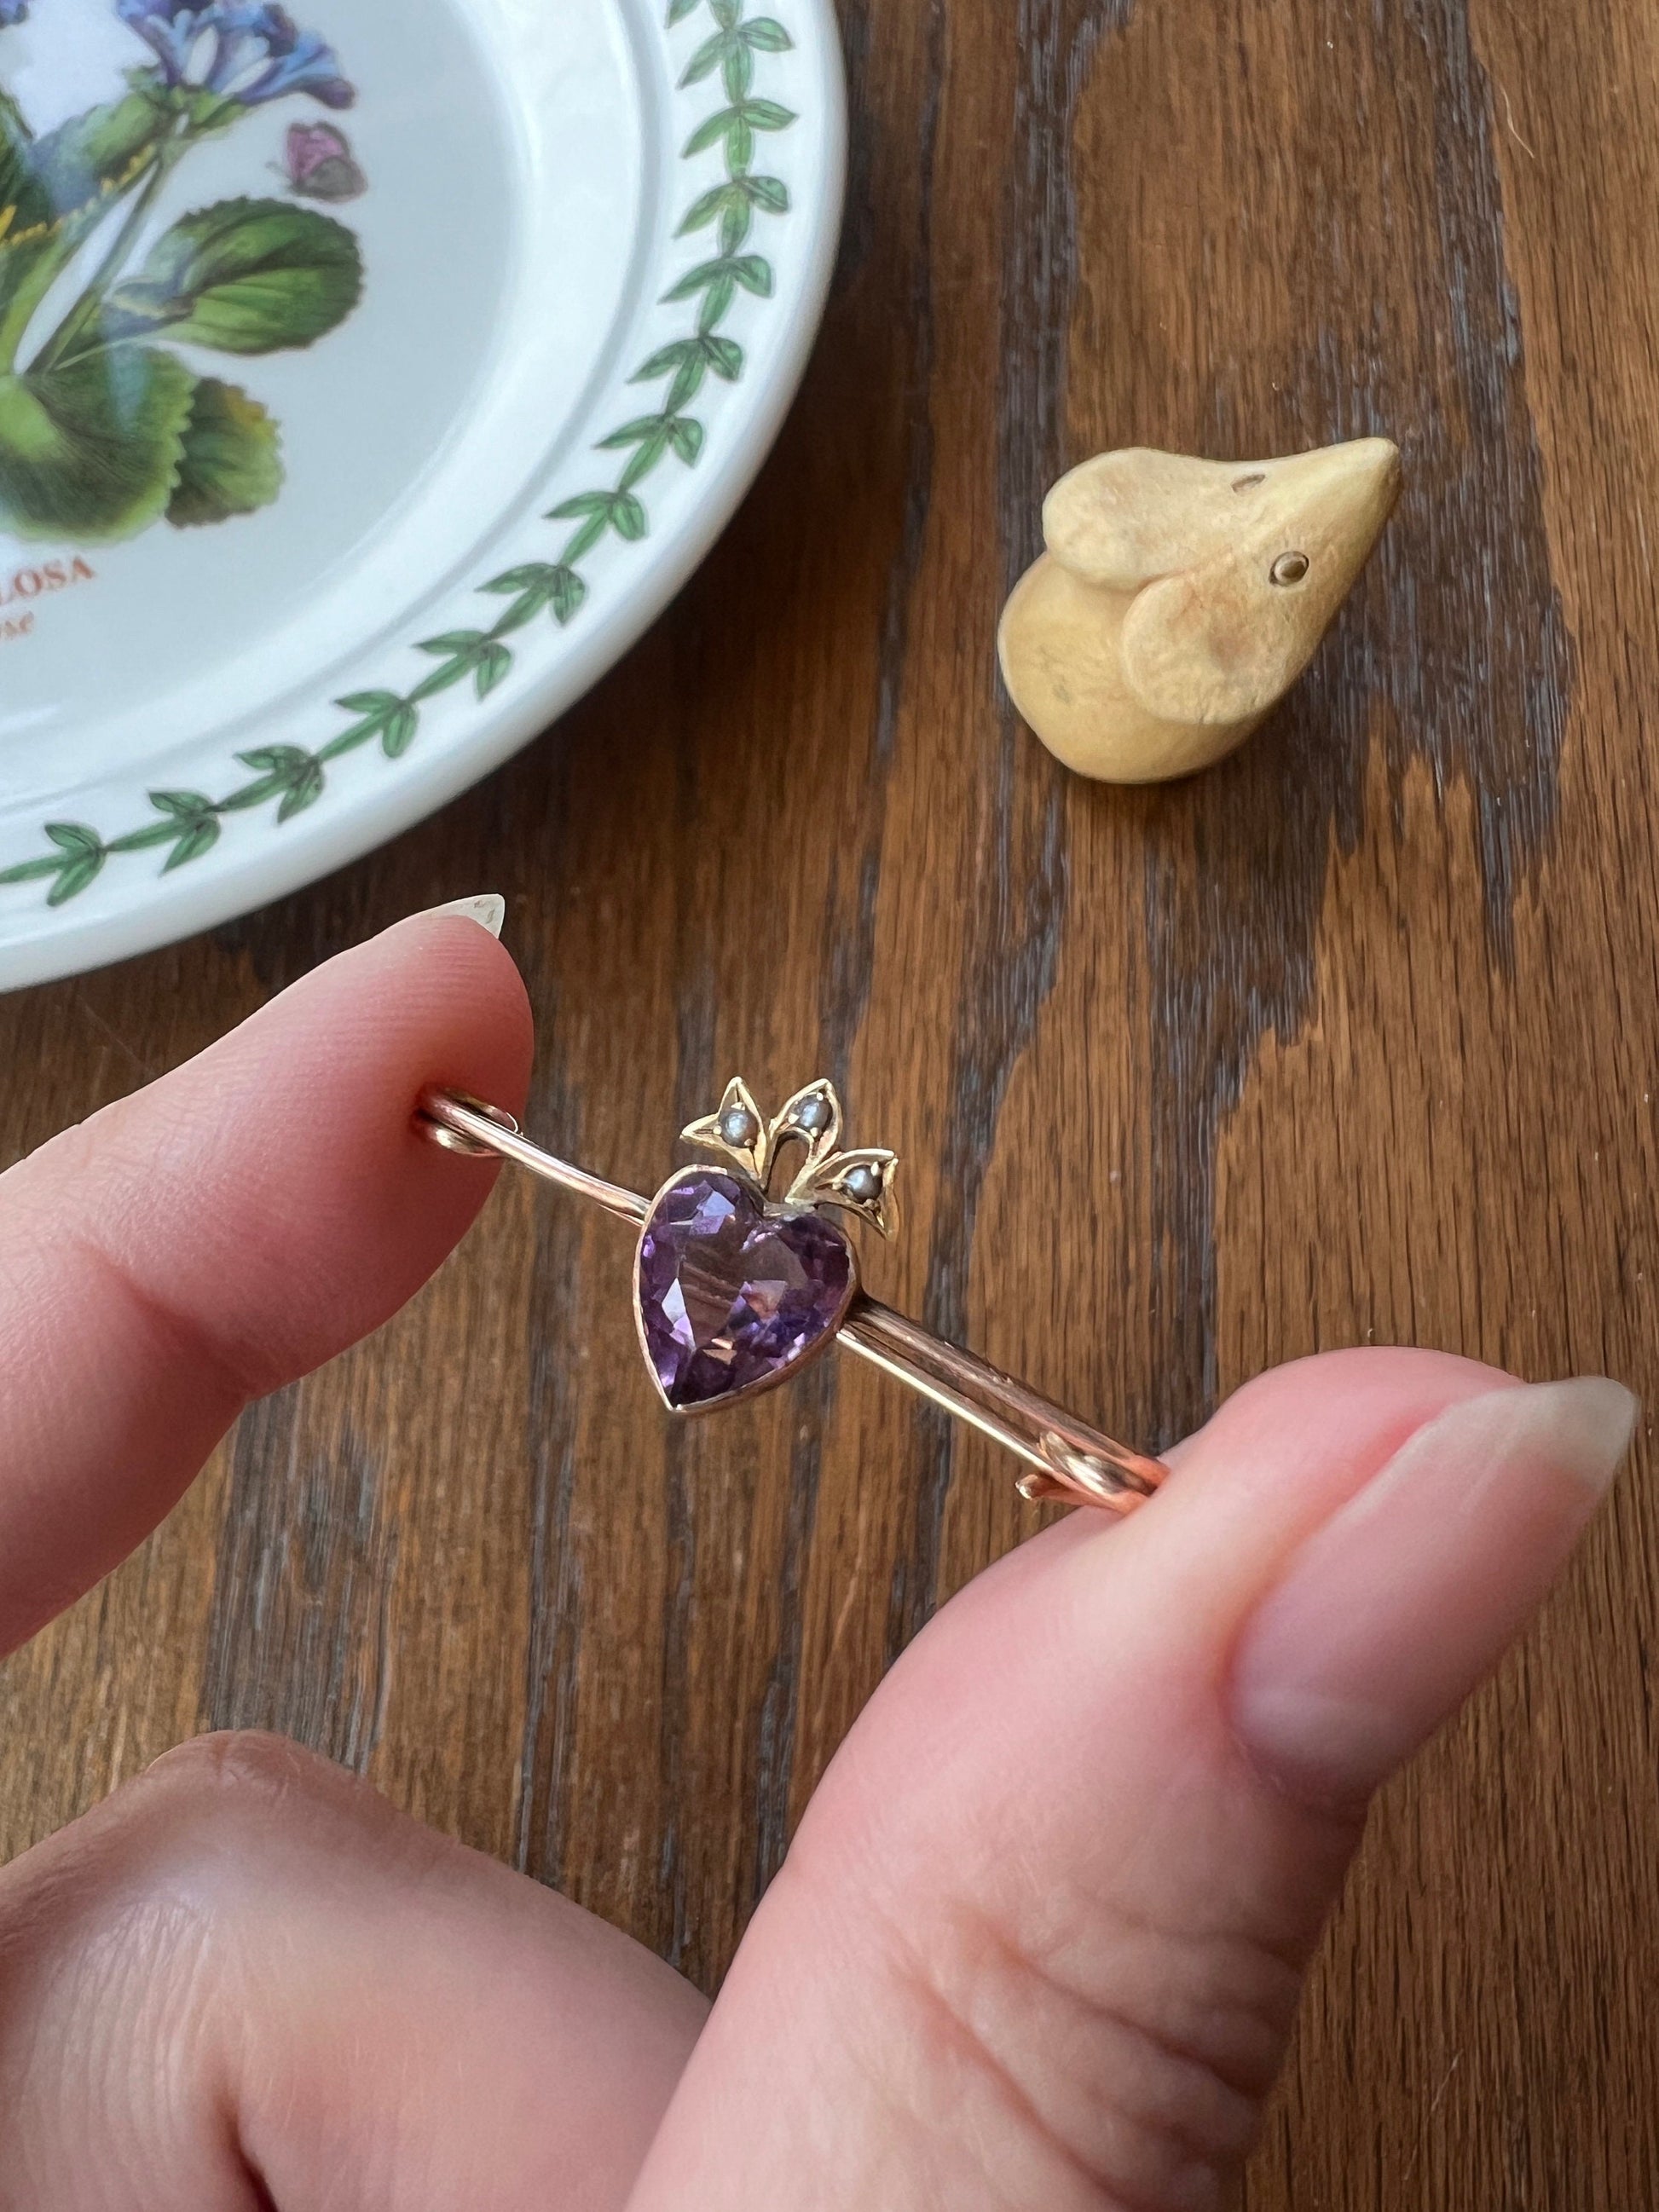 Crowned HEART Purple AMETHYST Pearl Safety Pin Figural 9k Gold Brooch Pendant Charm Holder Extender Connector Original Parts Romantic Gift